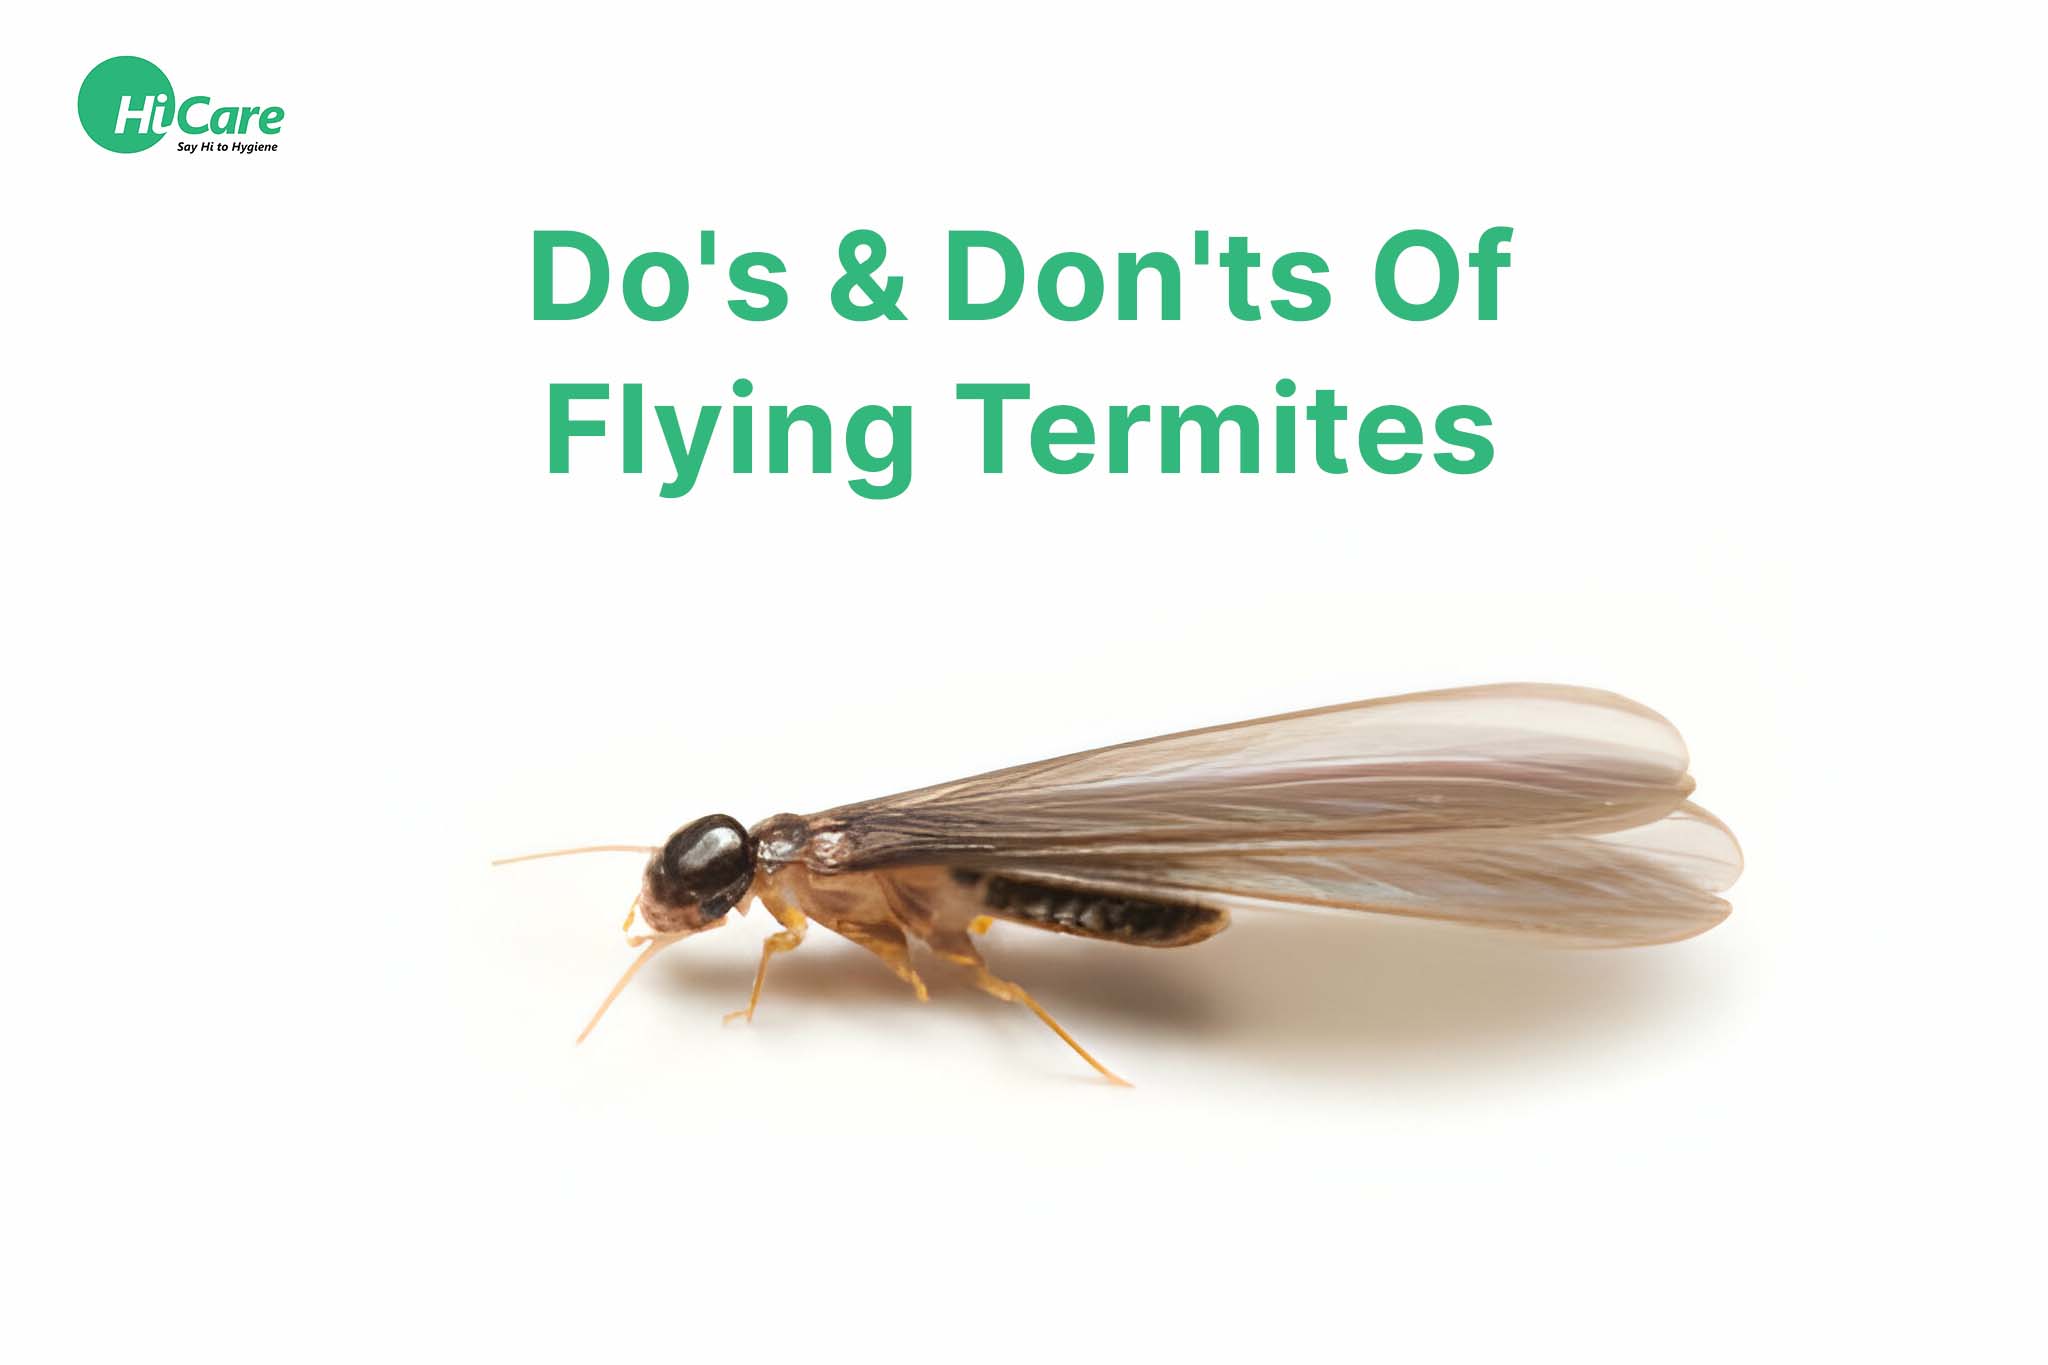 do's and don'ts of flying termites